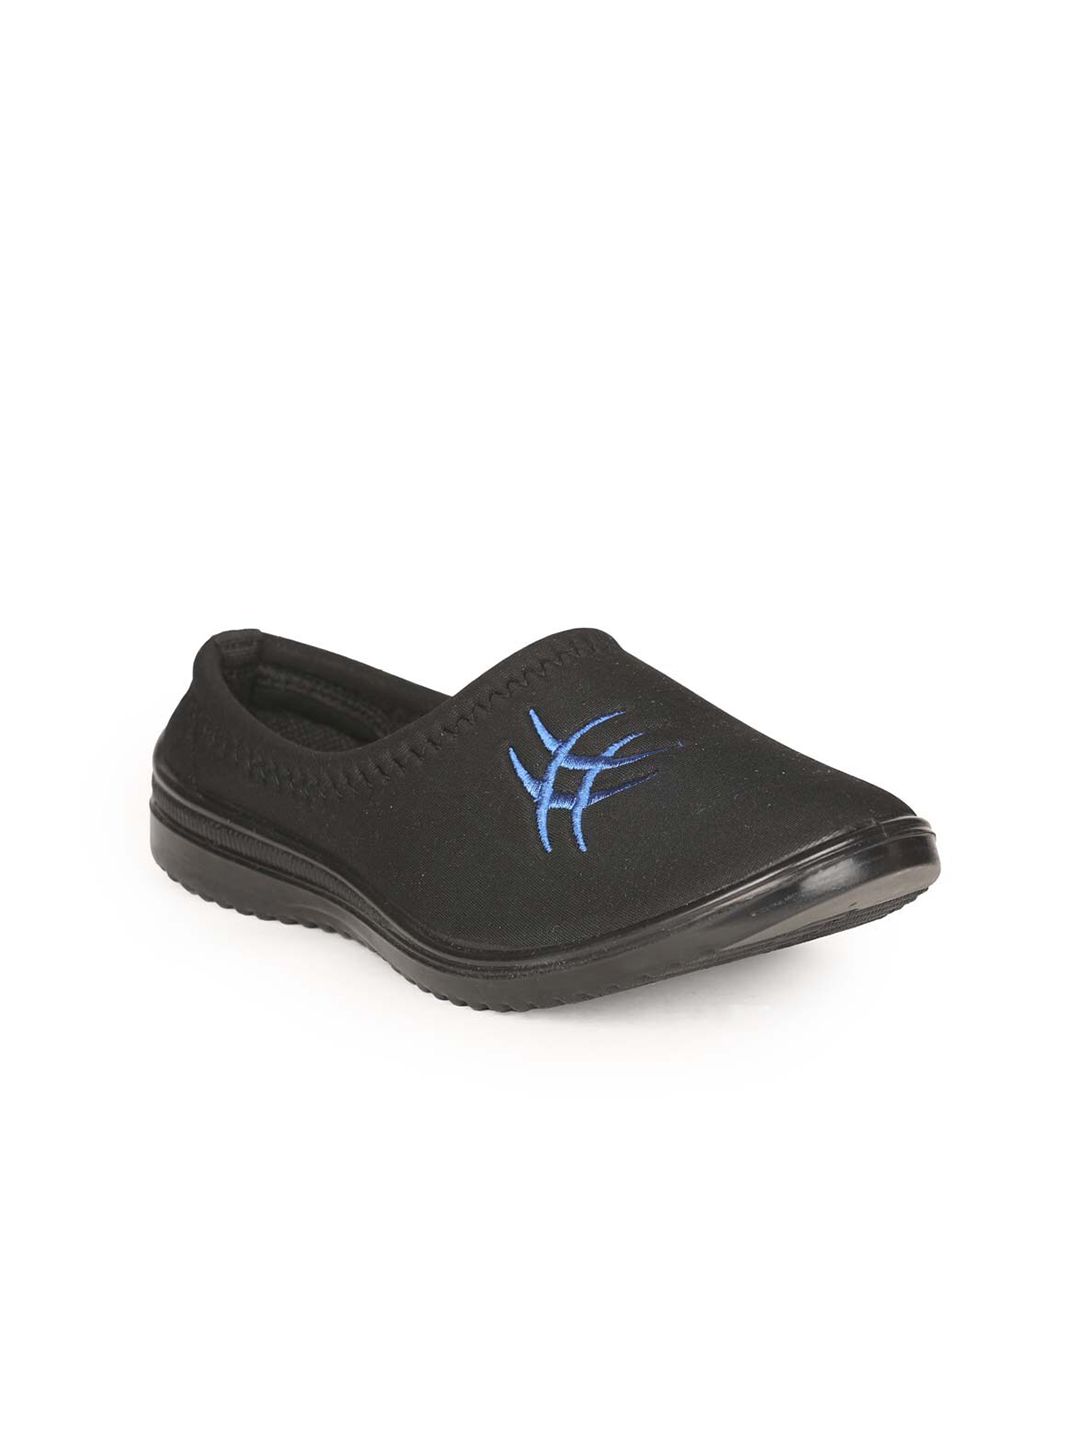 Paragon Women Black Slip-On Casual Shoes Price in India